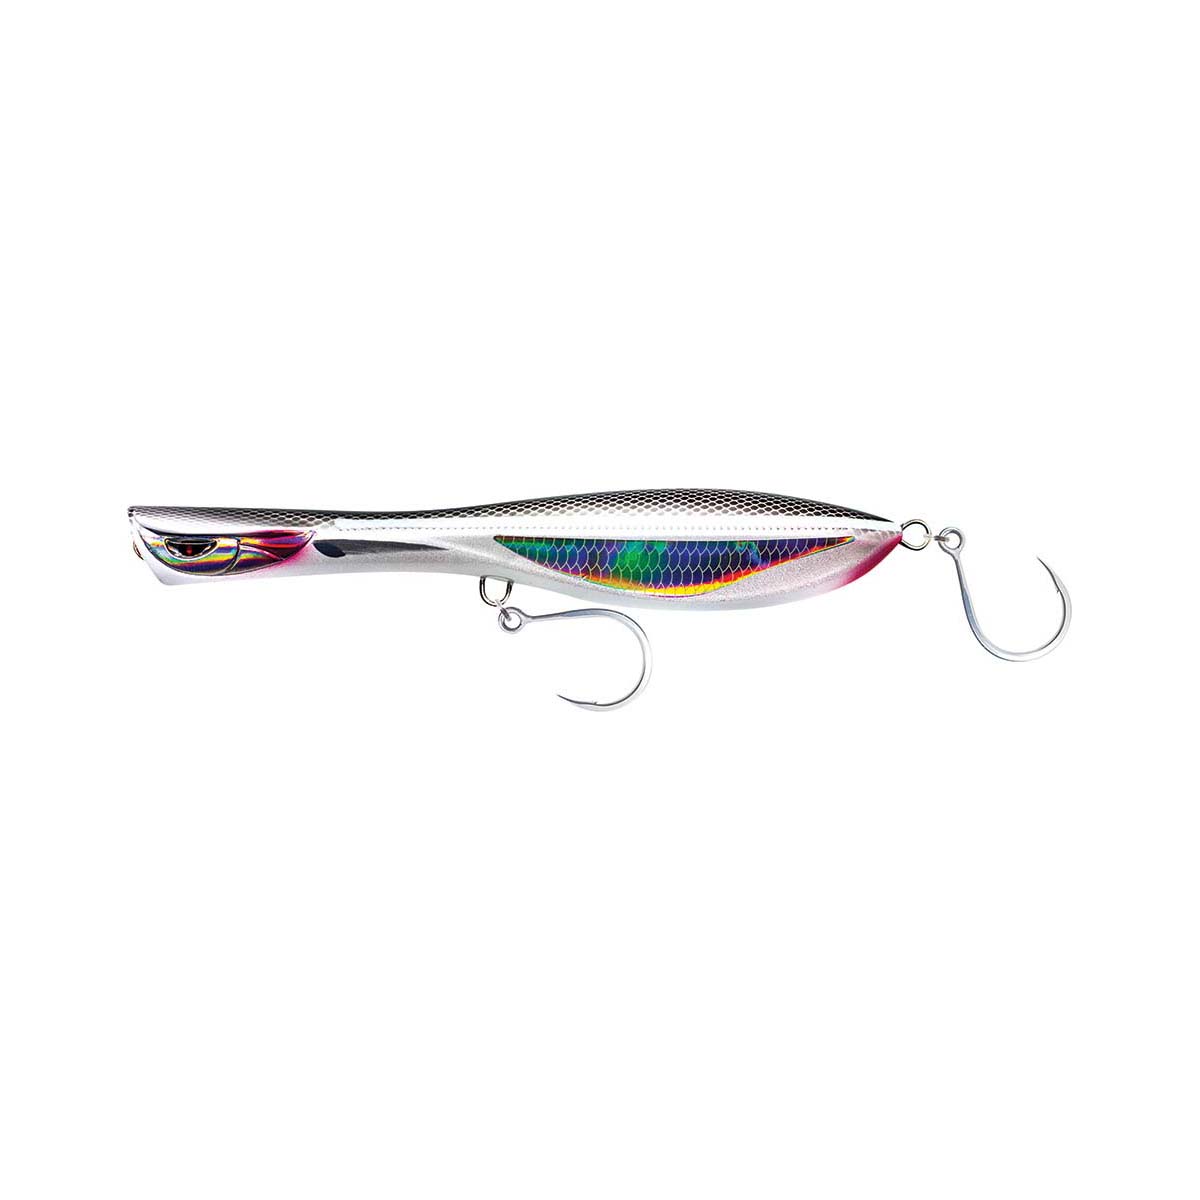 Nomad Dartwing Surface Stickbait Lure 13cm S Bleeding Mullet